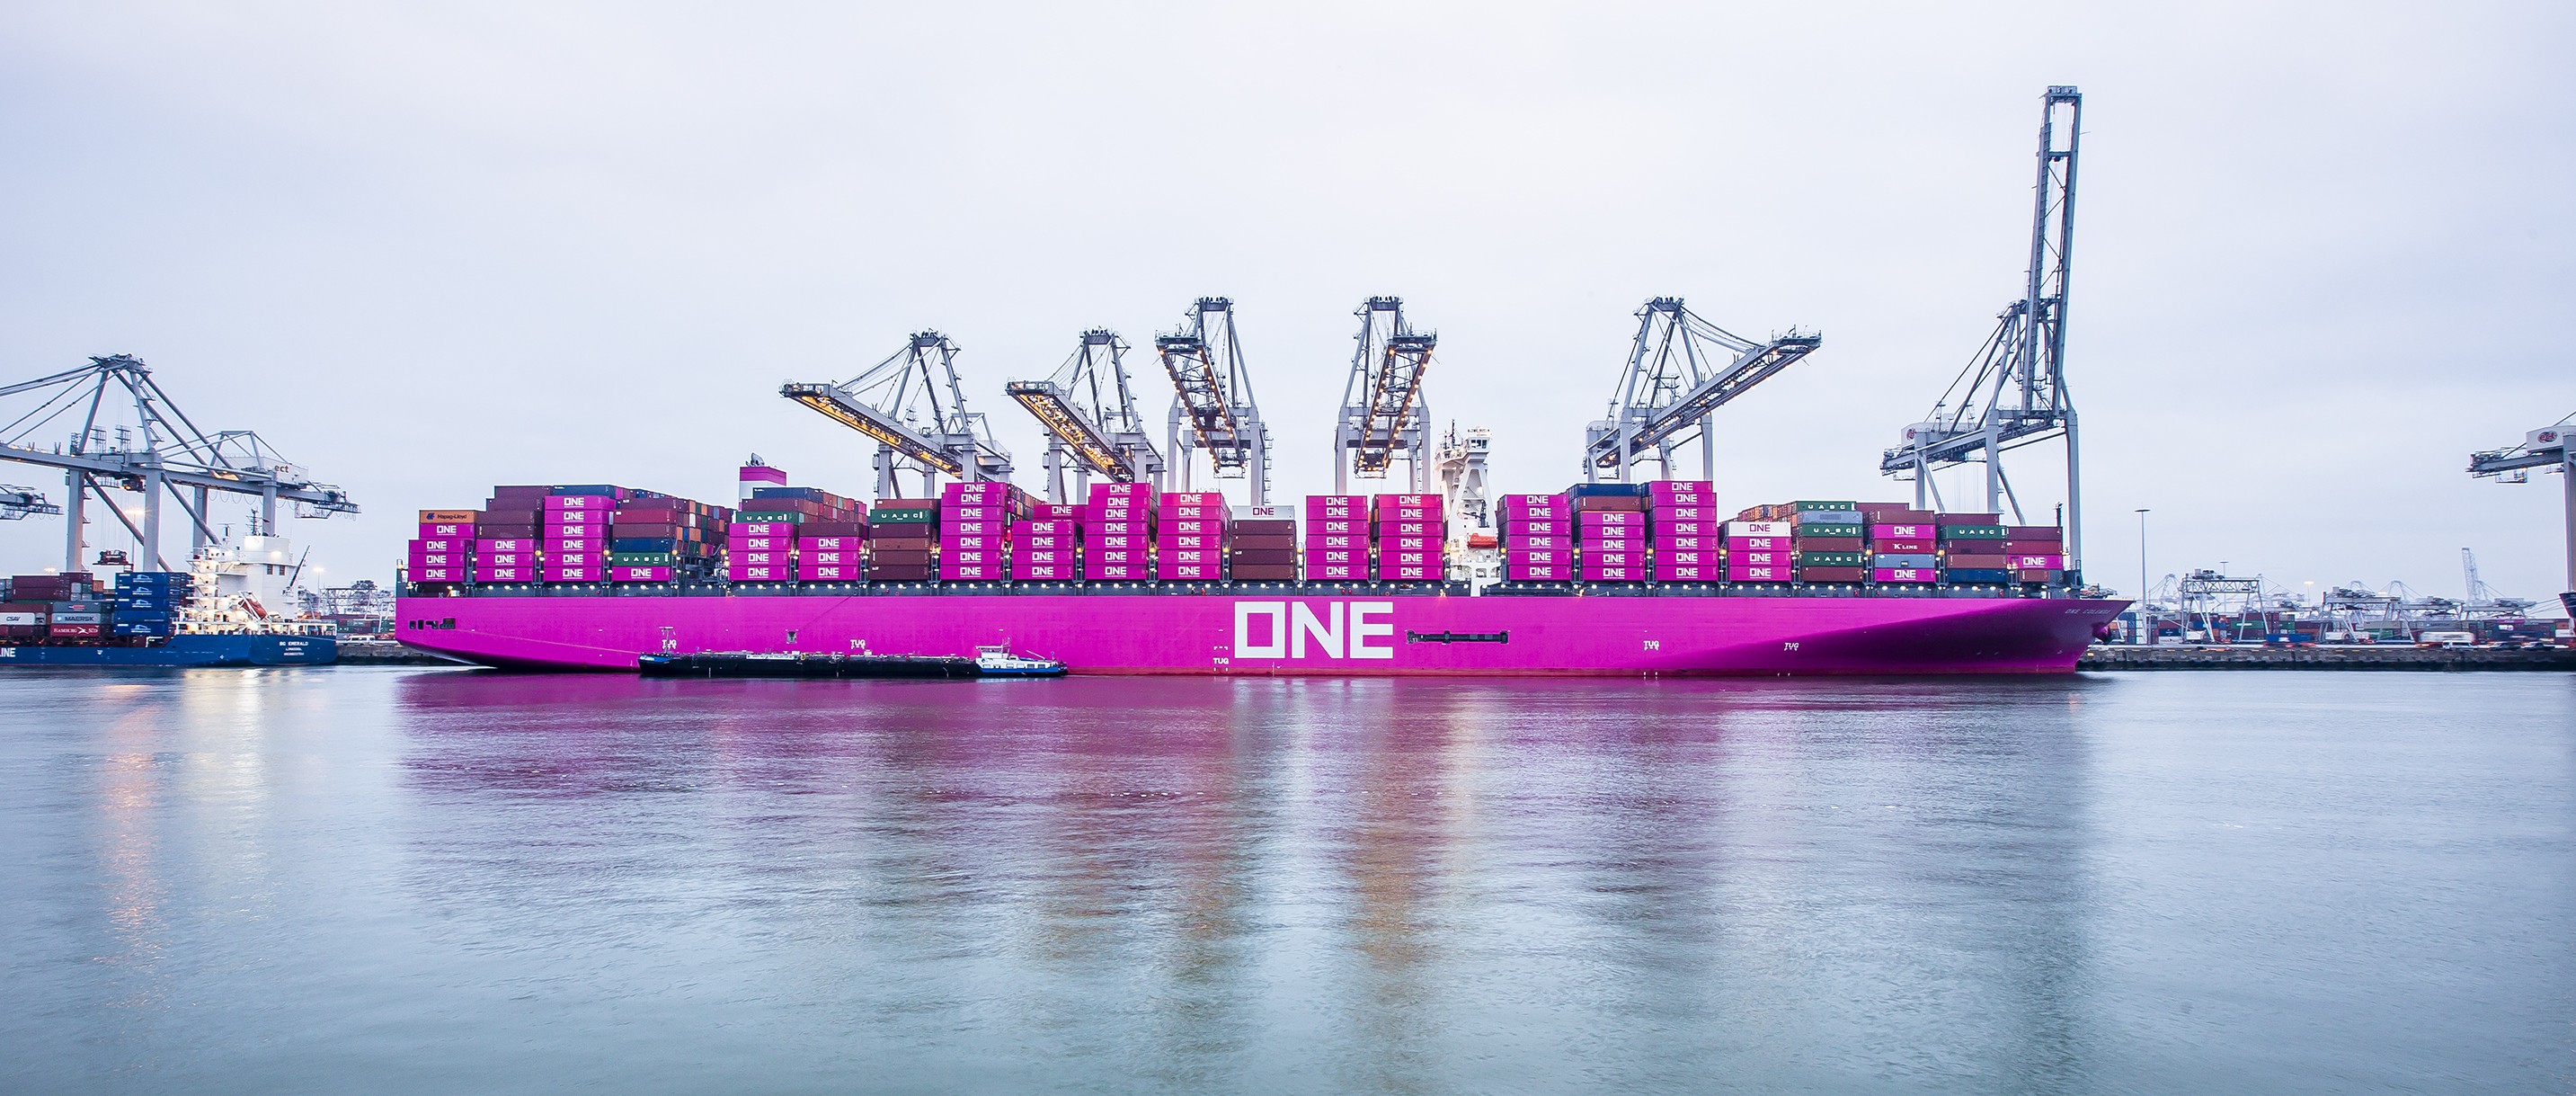 Ocean Network Express becomes latest company to trial GoodFuels’s biofuel